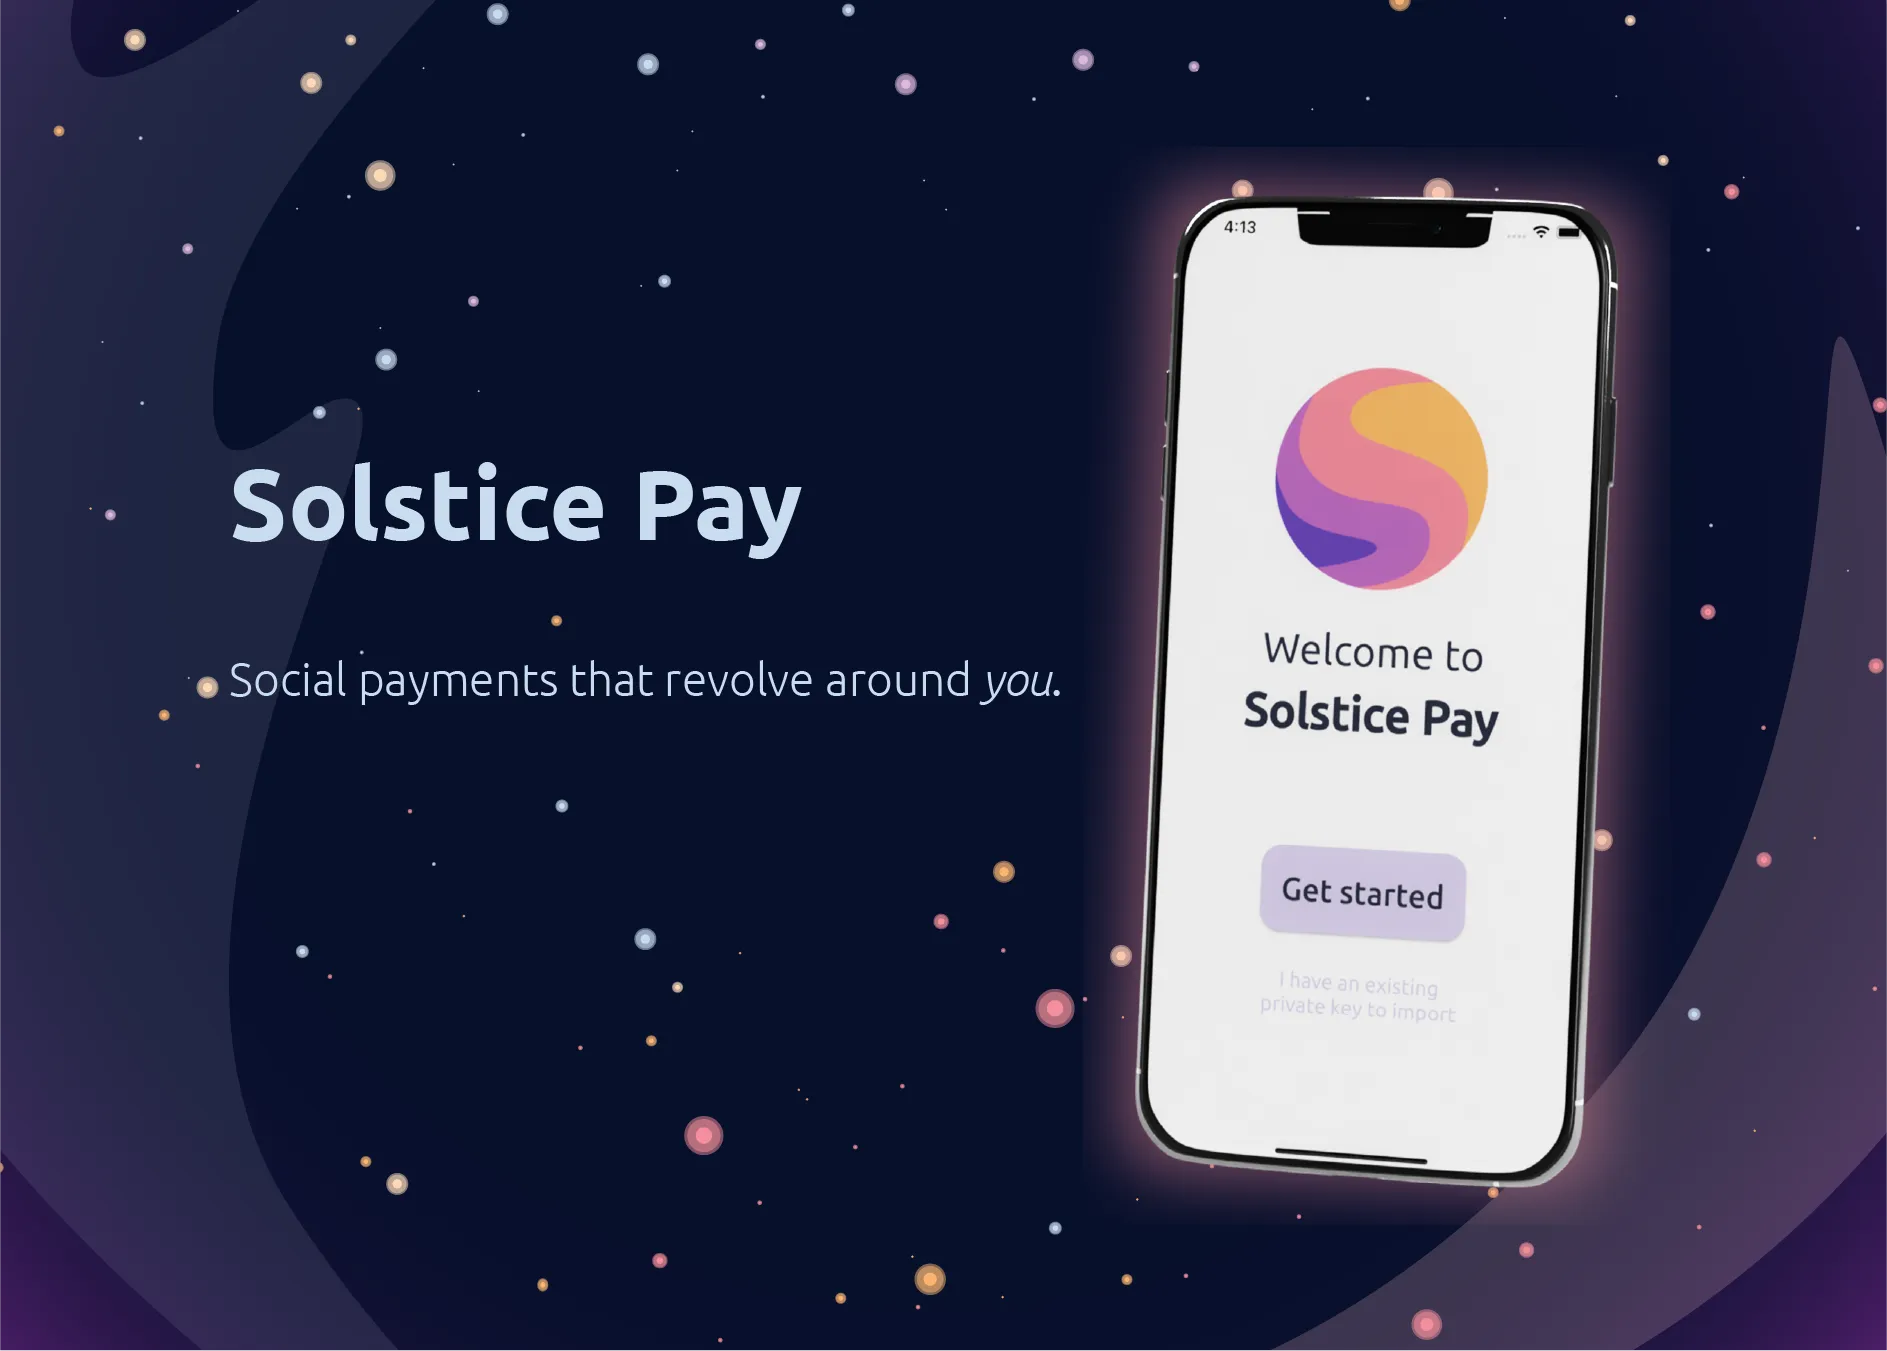 Solstice Pay